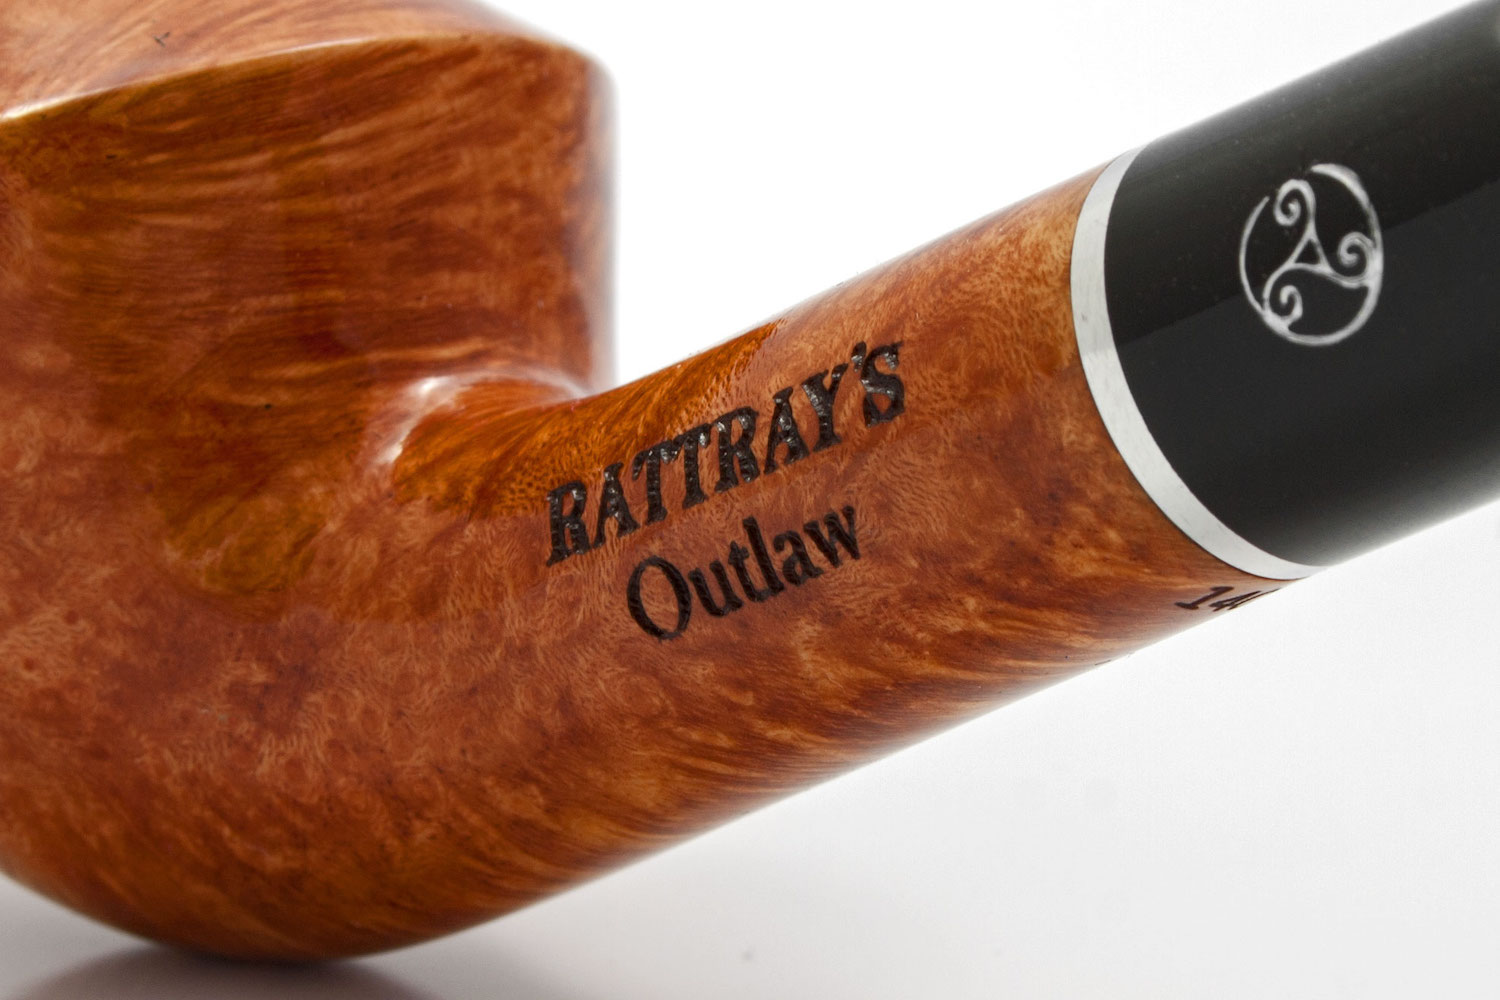 Rattray's Outlaw Light 140